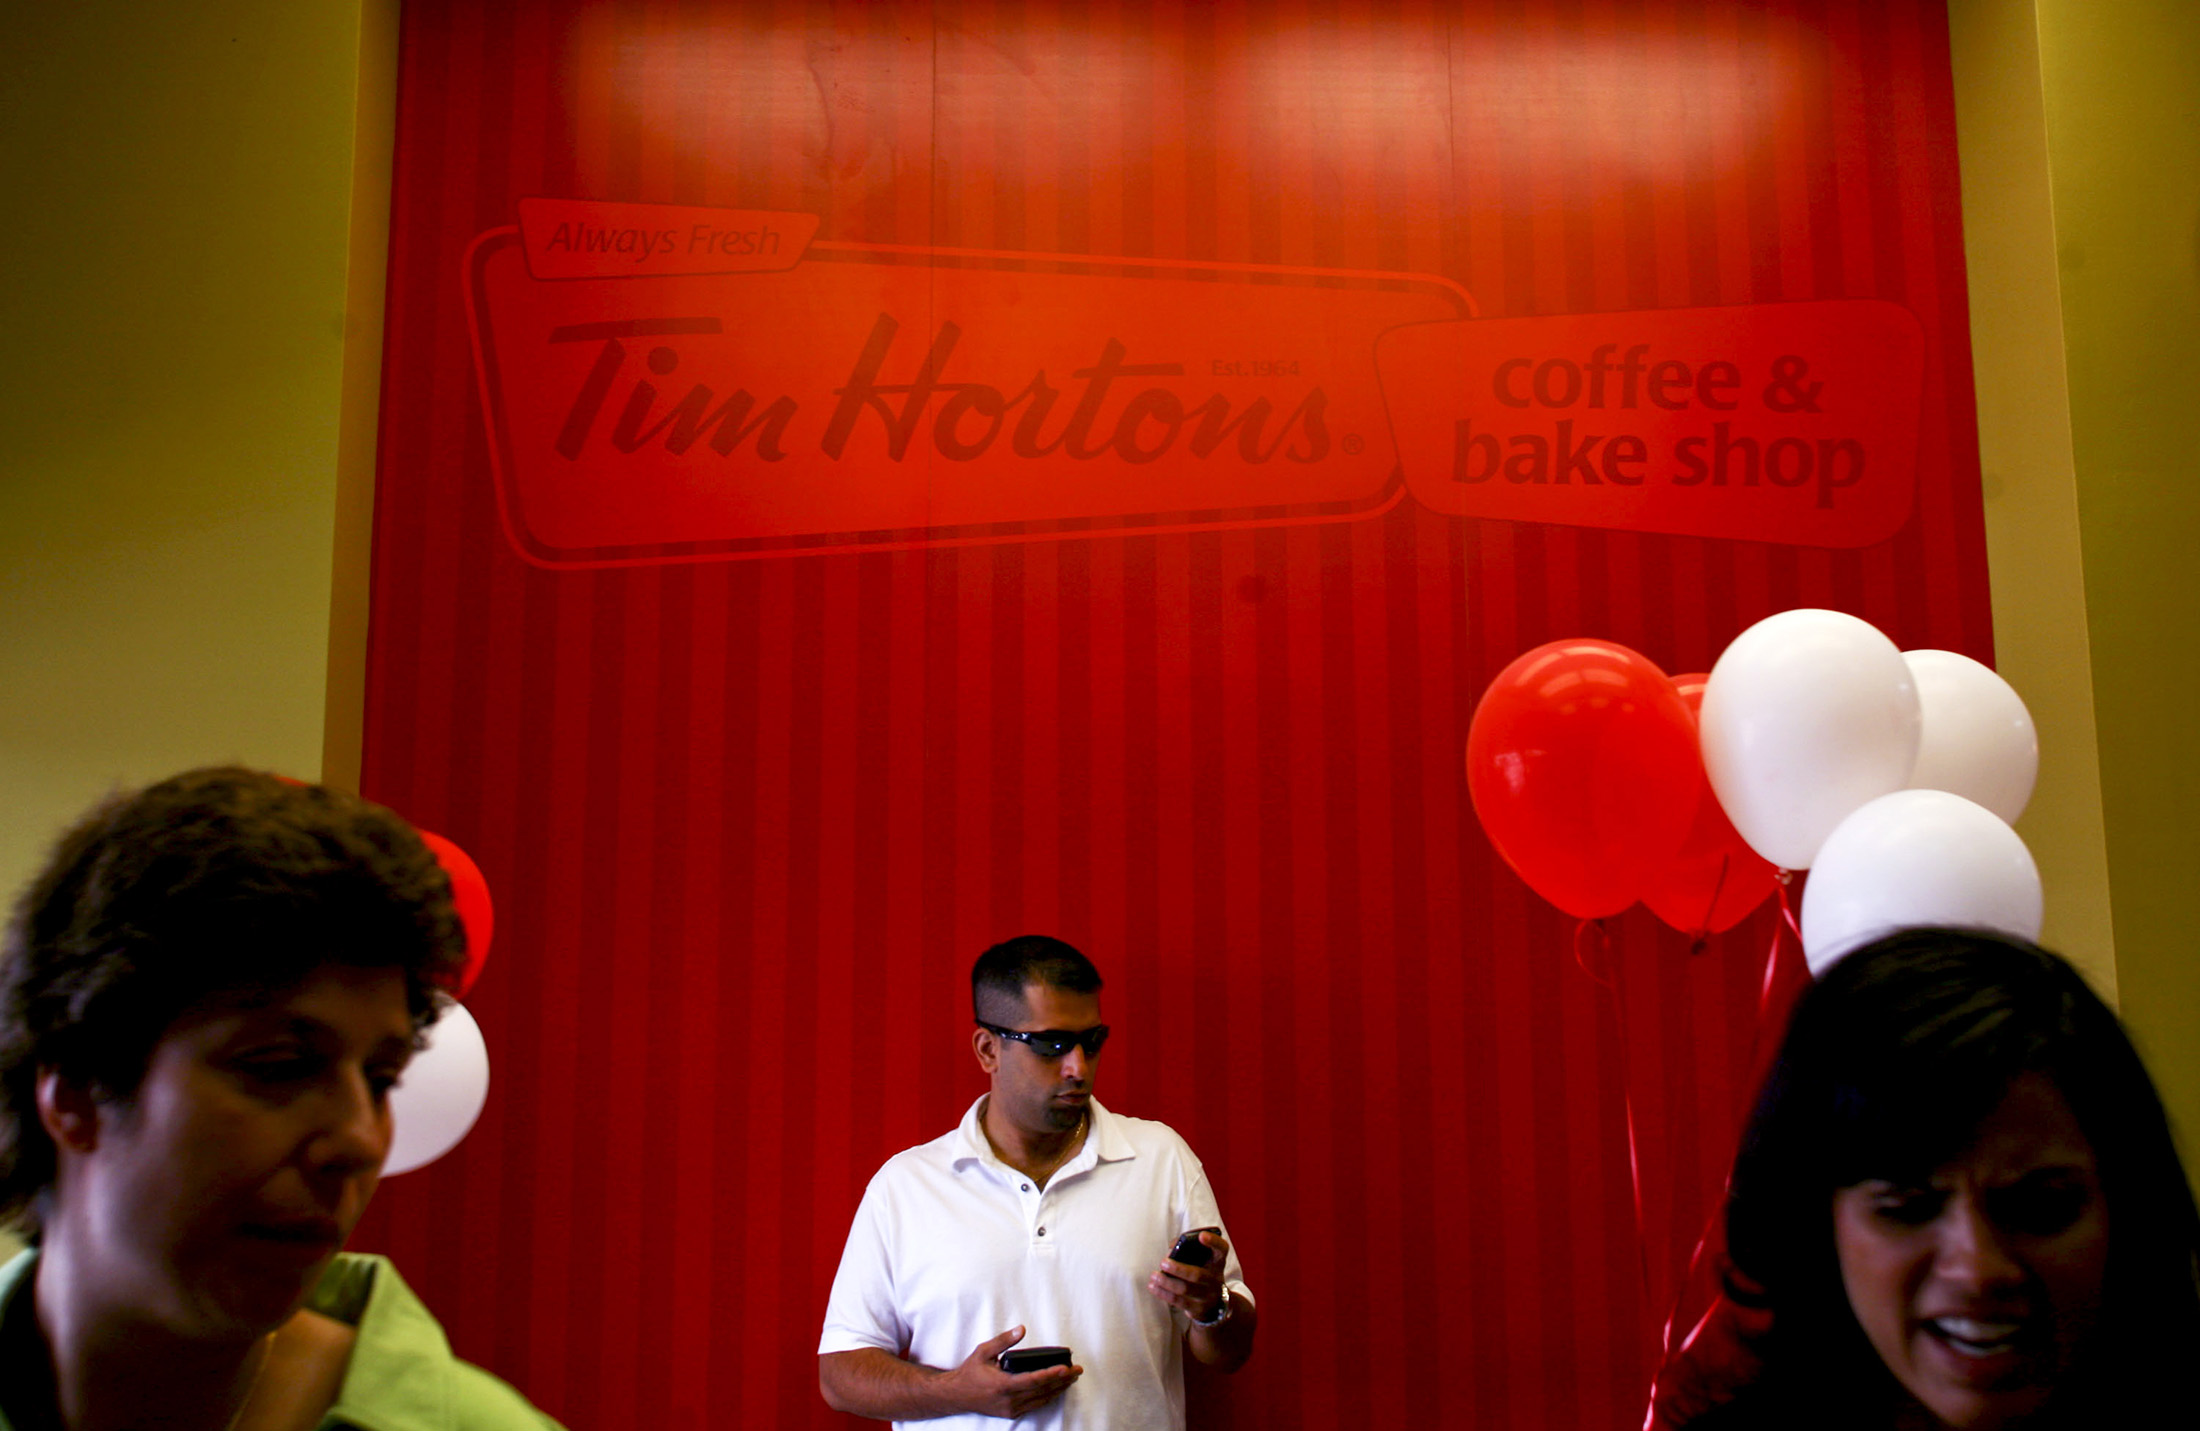 Tim Hortons to open first India location as it expands internationally